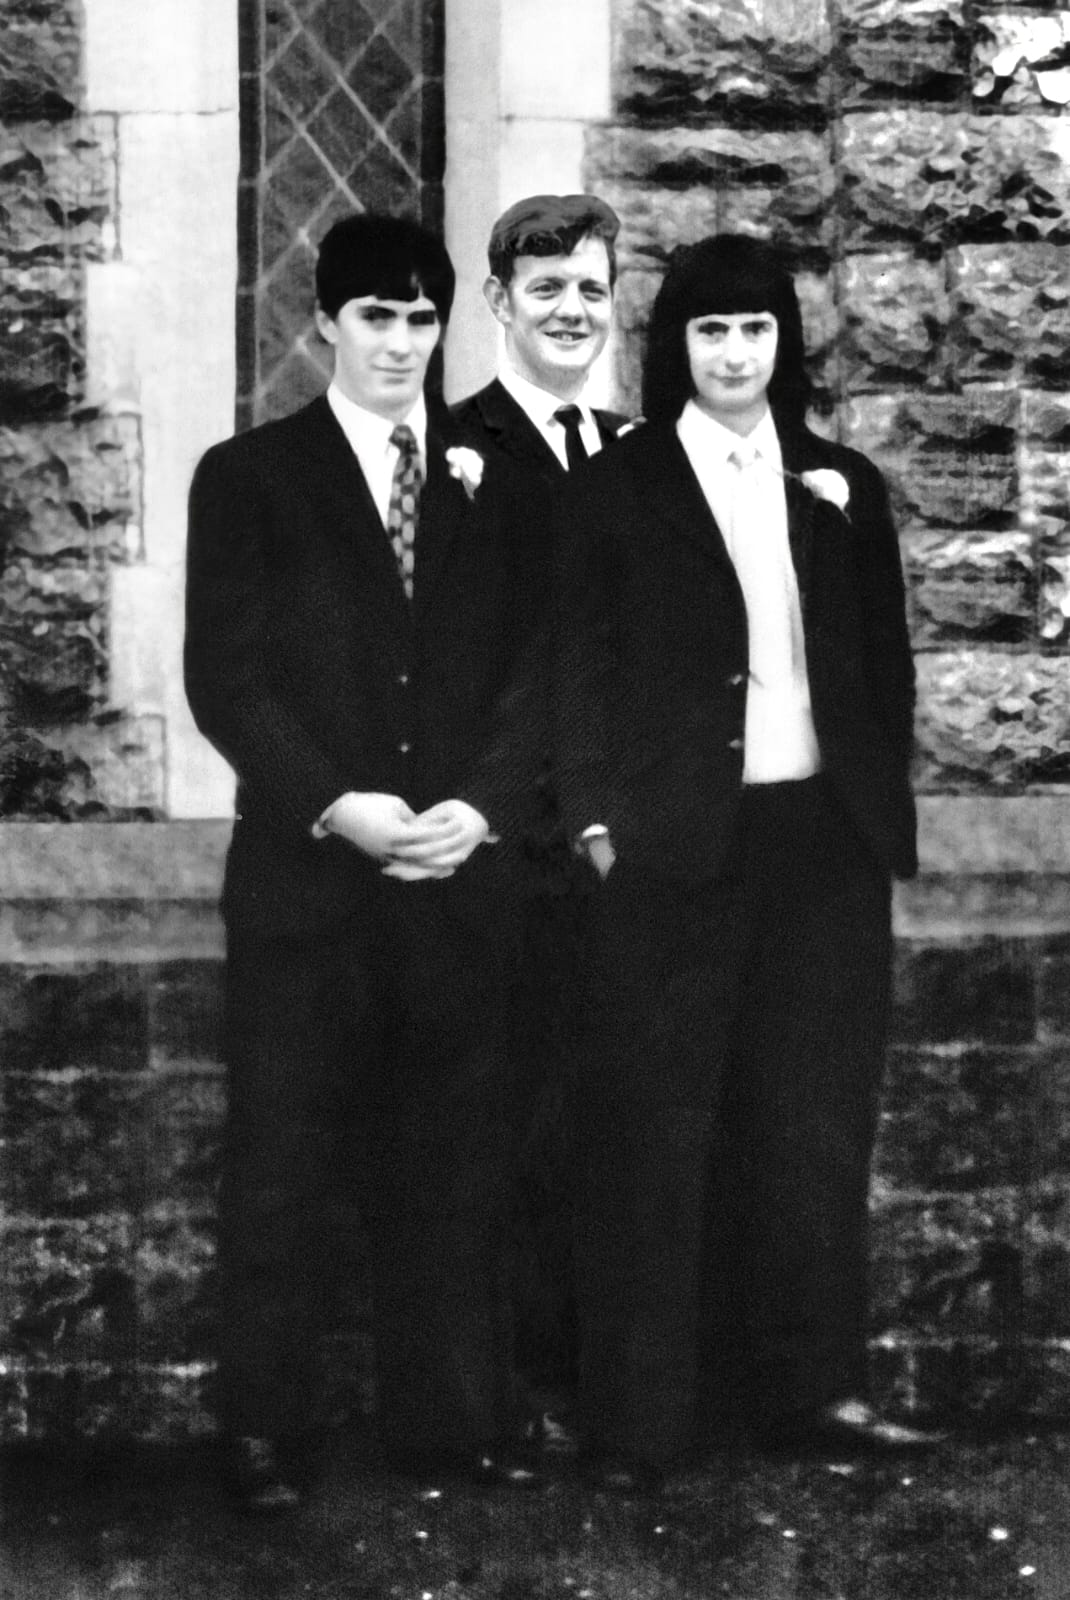 A composite image of Martin Conmey, Dick Donnelly and Marty Kerrigan at a wedding shortly before Marty’s death.